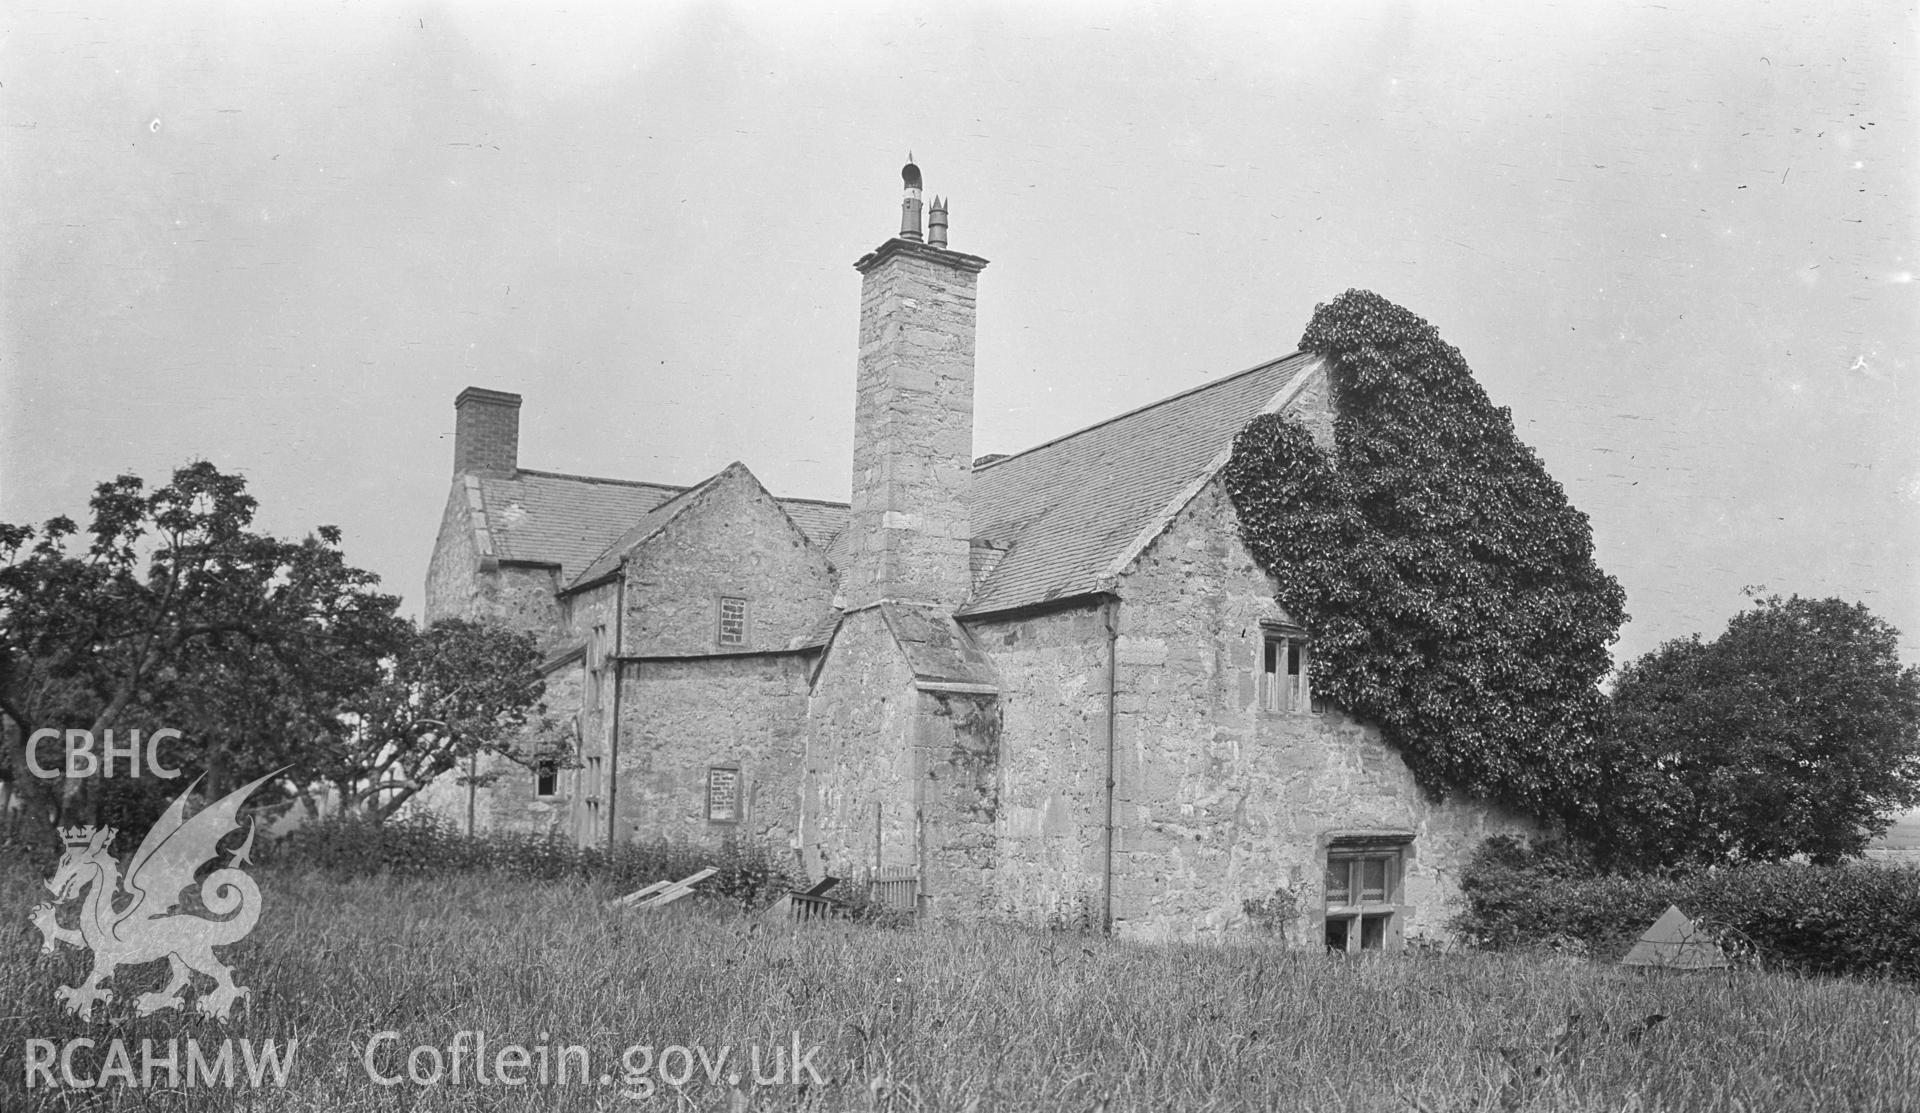 Digital copy of a nitrate negative showing view of Hendre Fawr from the south-west taken by Leonard Monroe, undated.